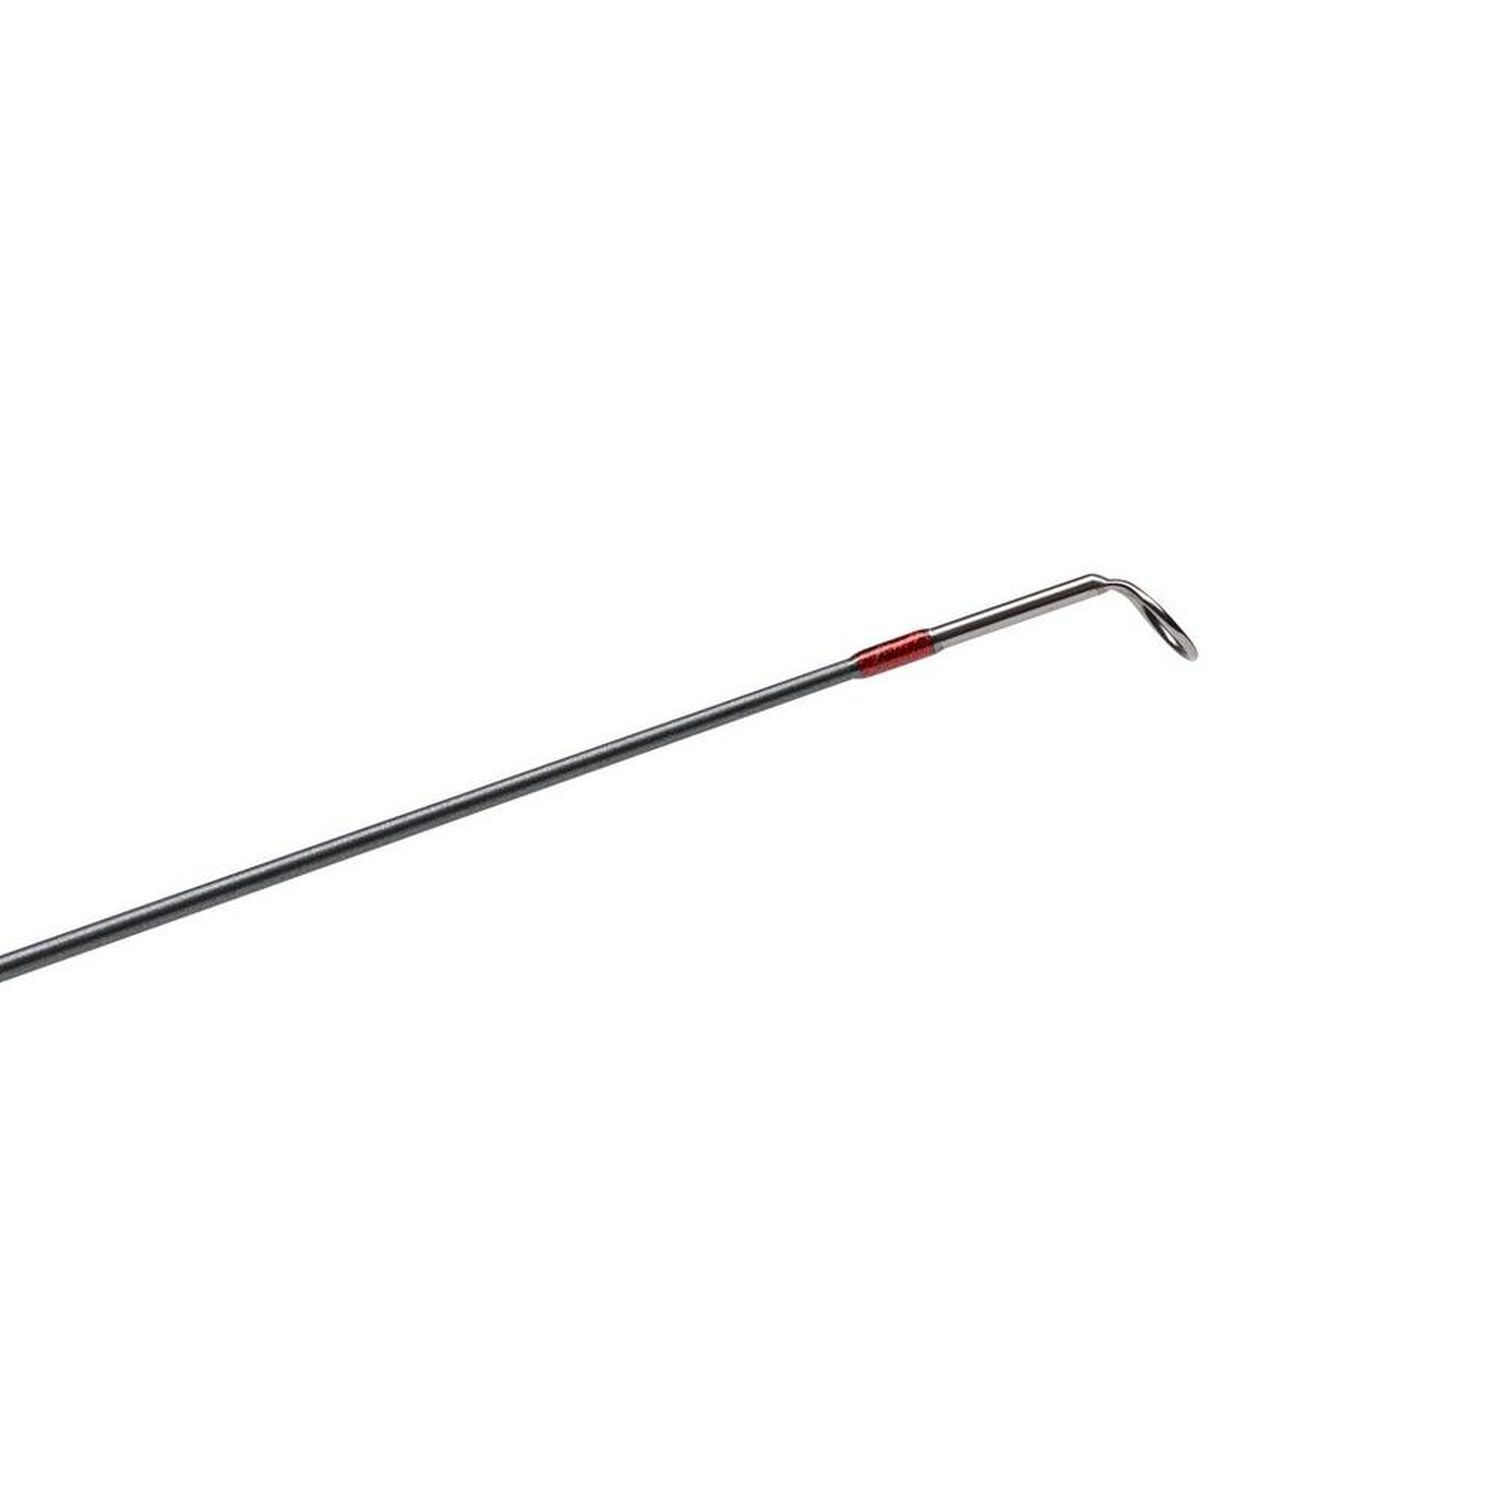 Greys Wing Travel Fly Rod online bobleisure - Canada